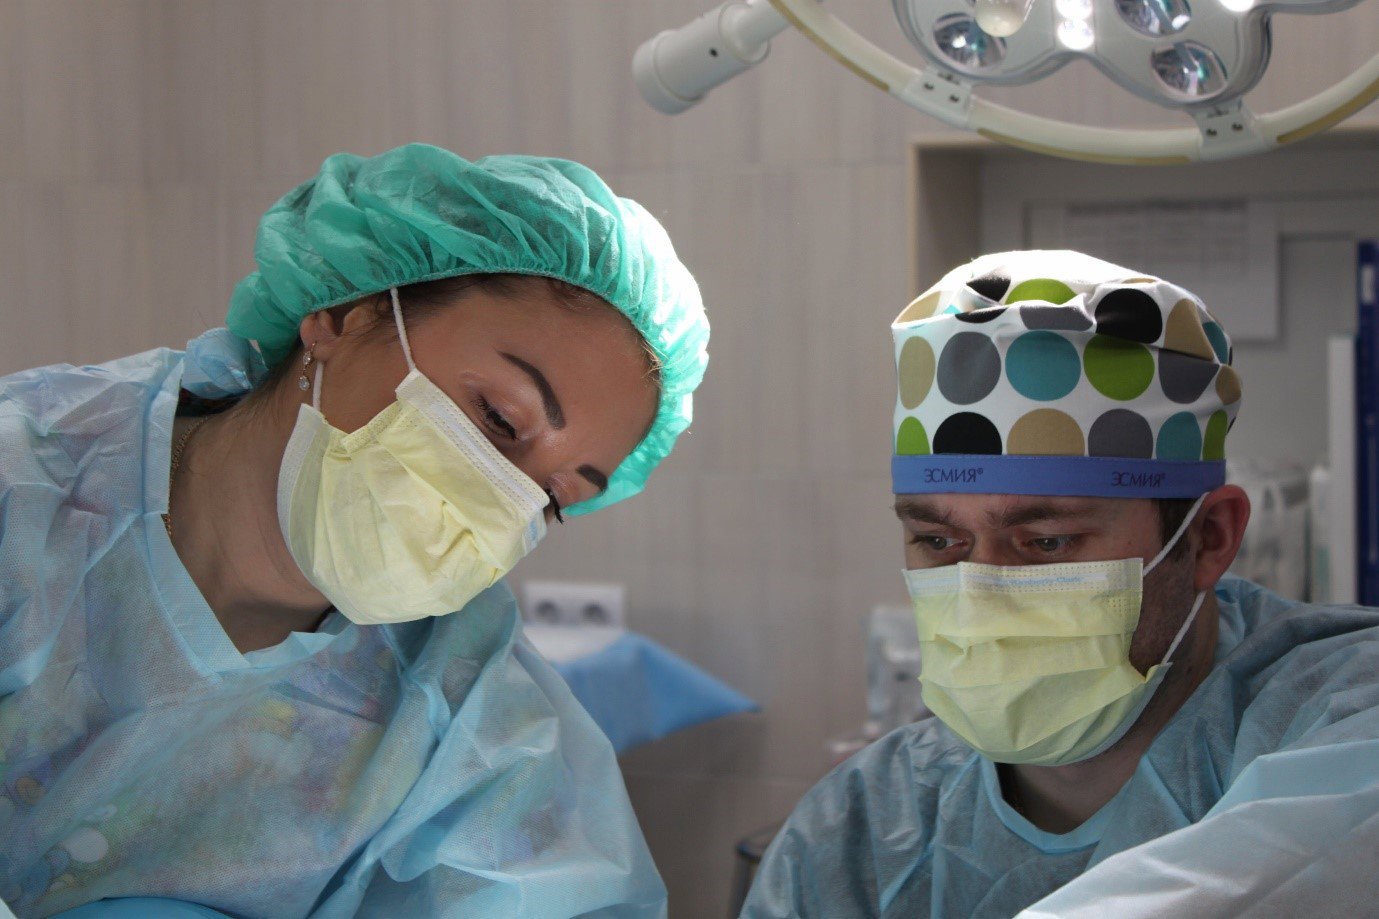 two surgeons operating on a patient